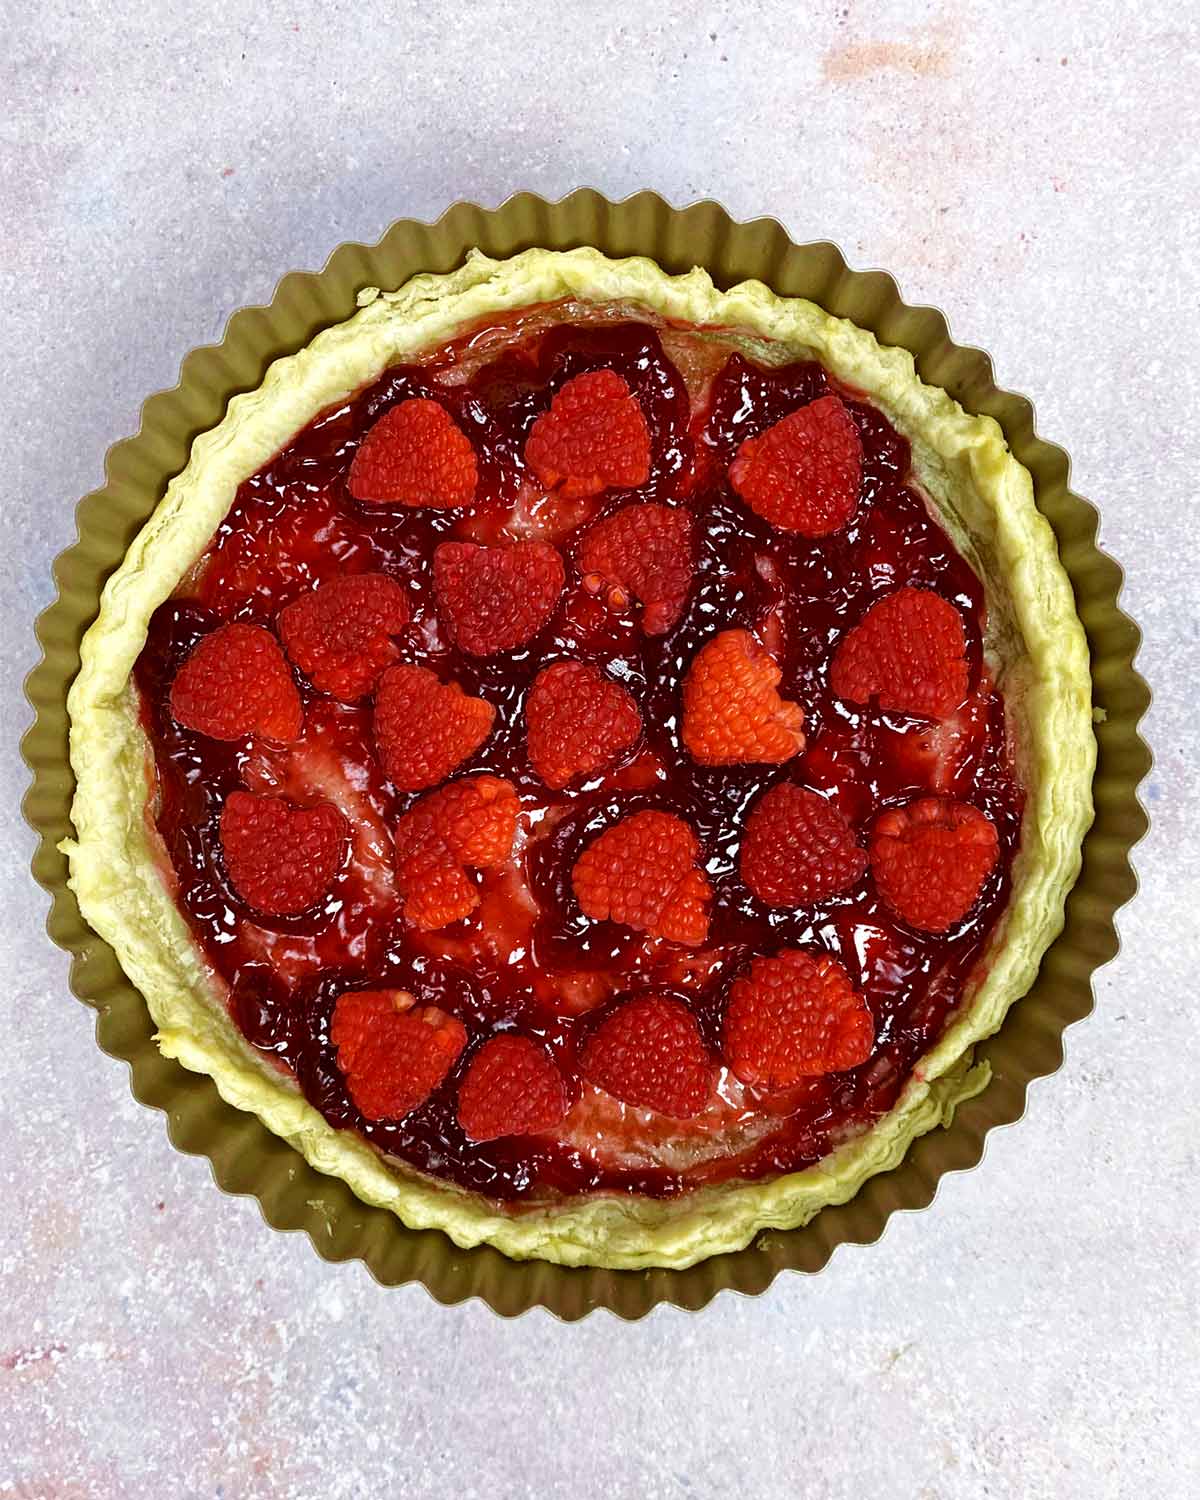 A pie crust with jam and fresh raspberries in it.